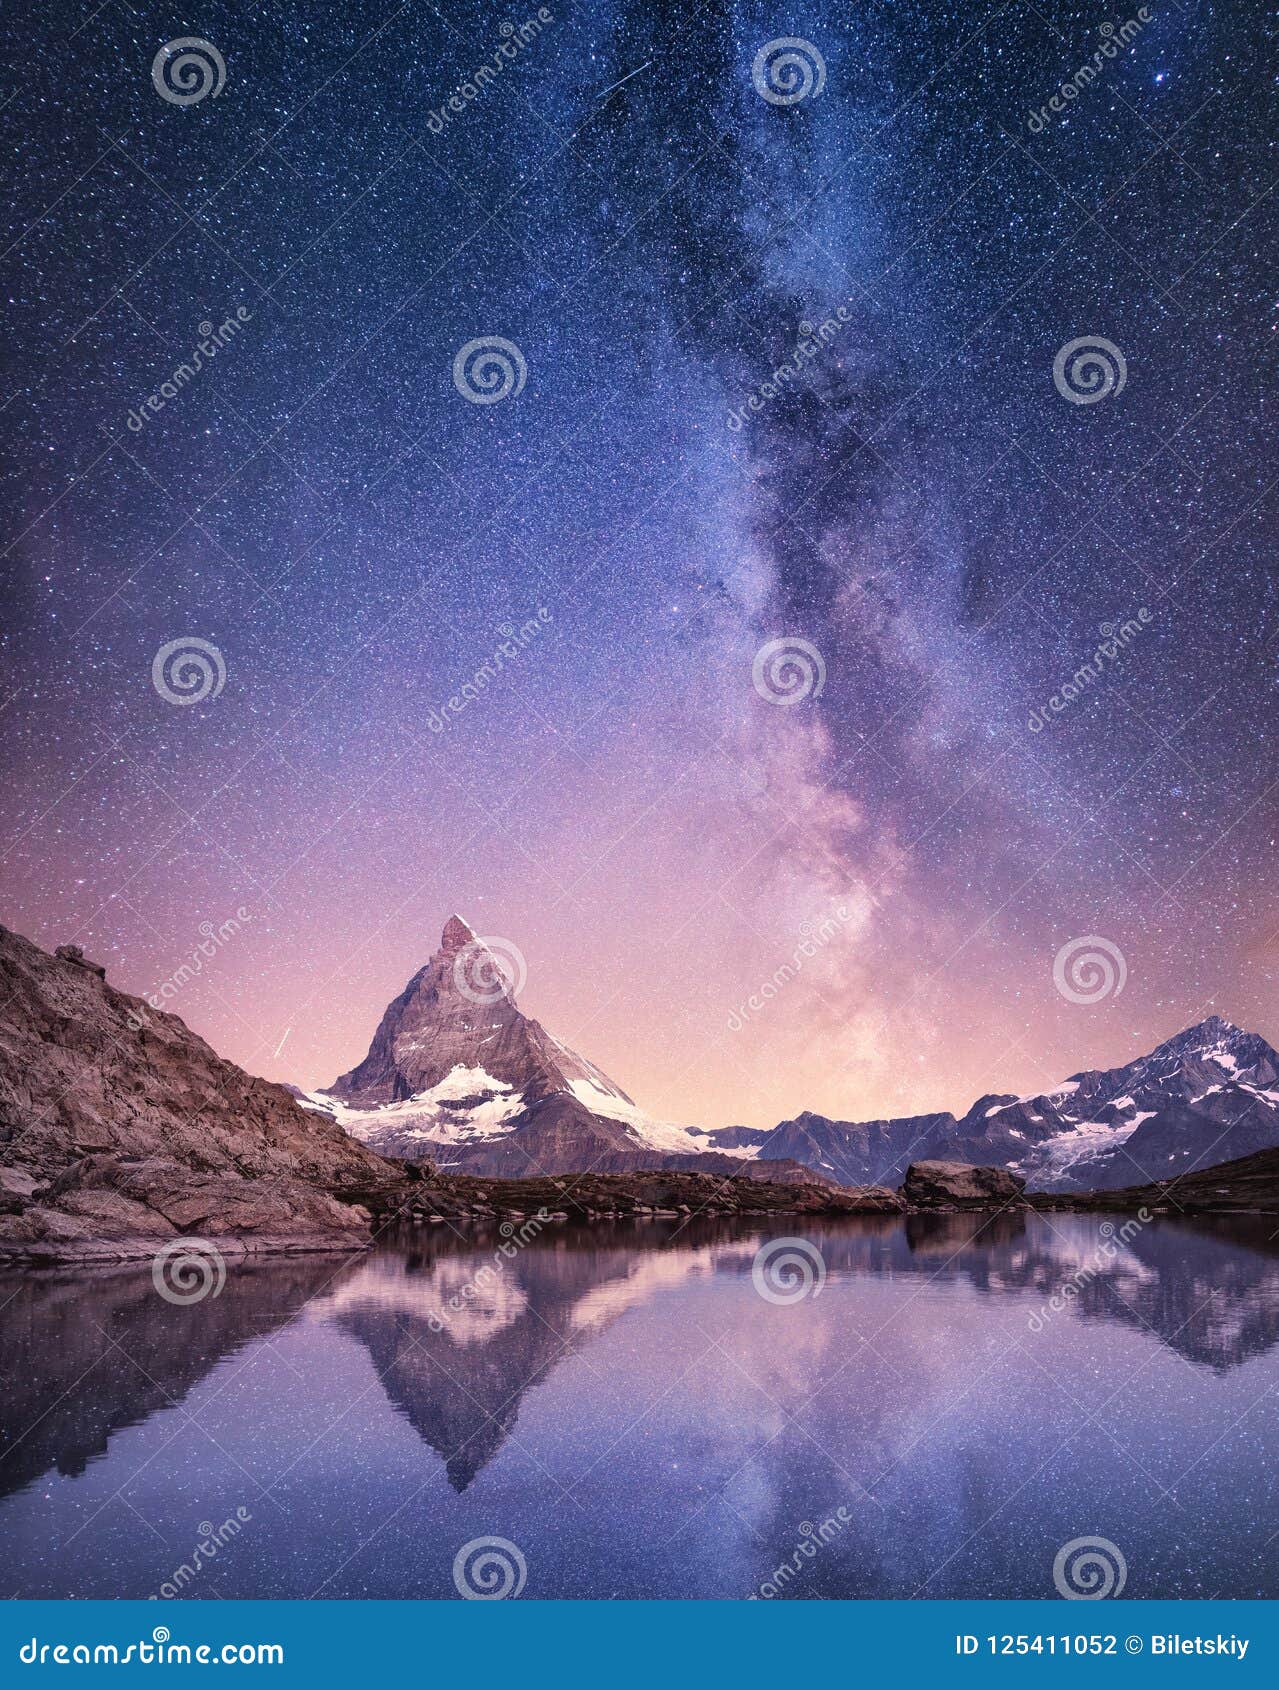 matterhorn and reflection on the water surface at the night time. milky way above matterhorn, switzerland.